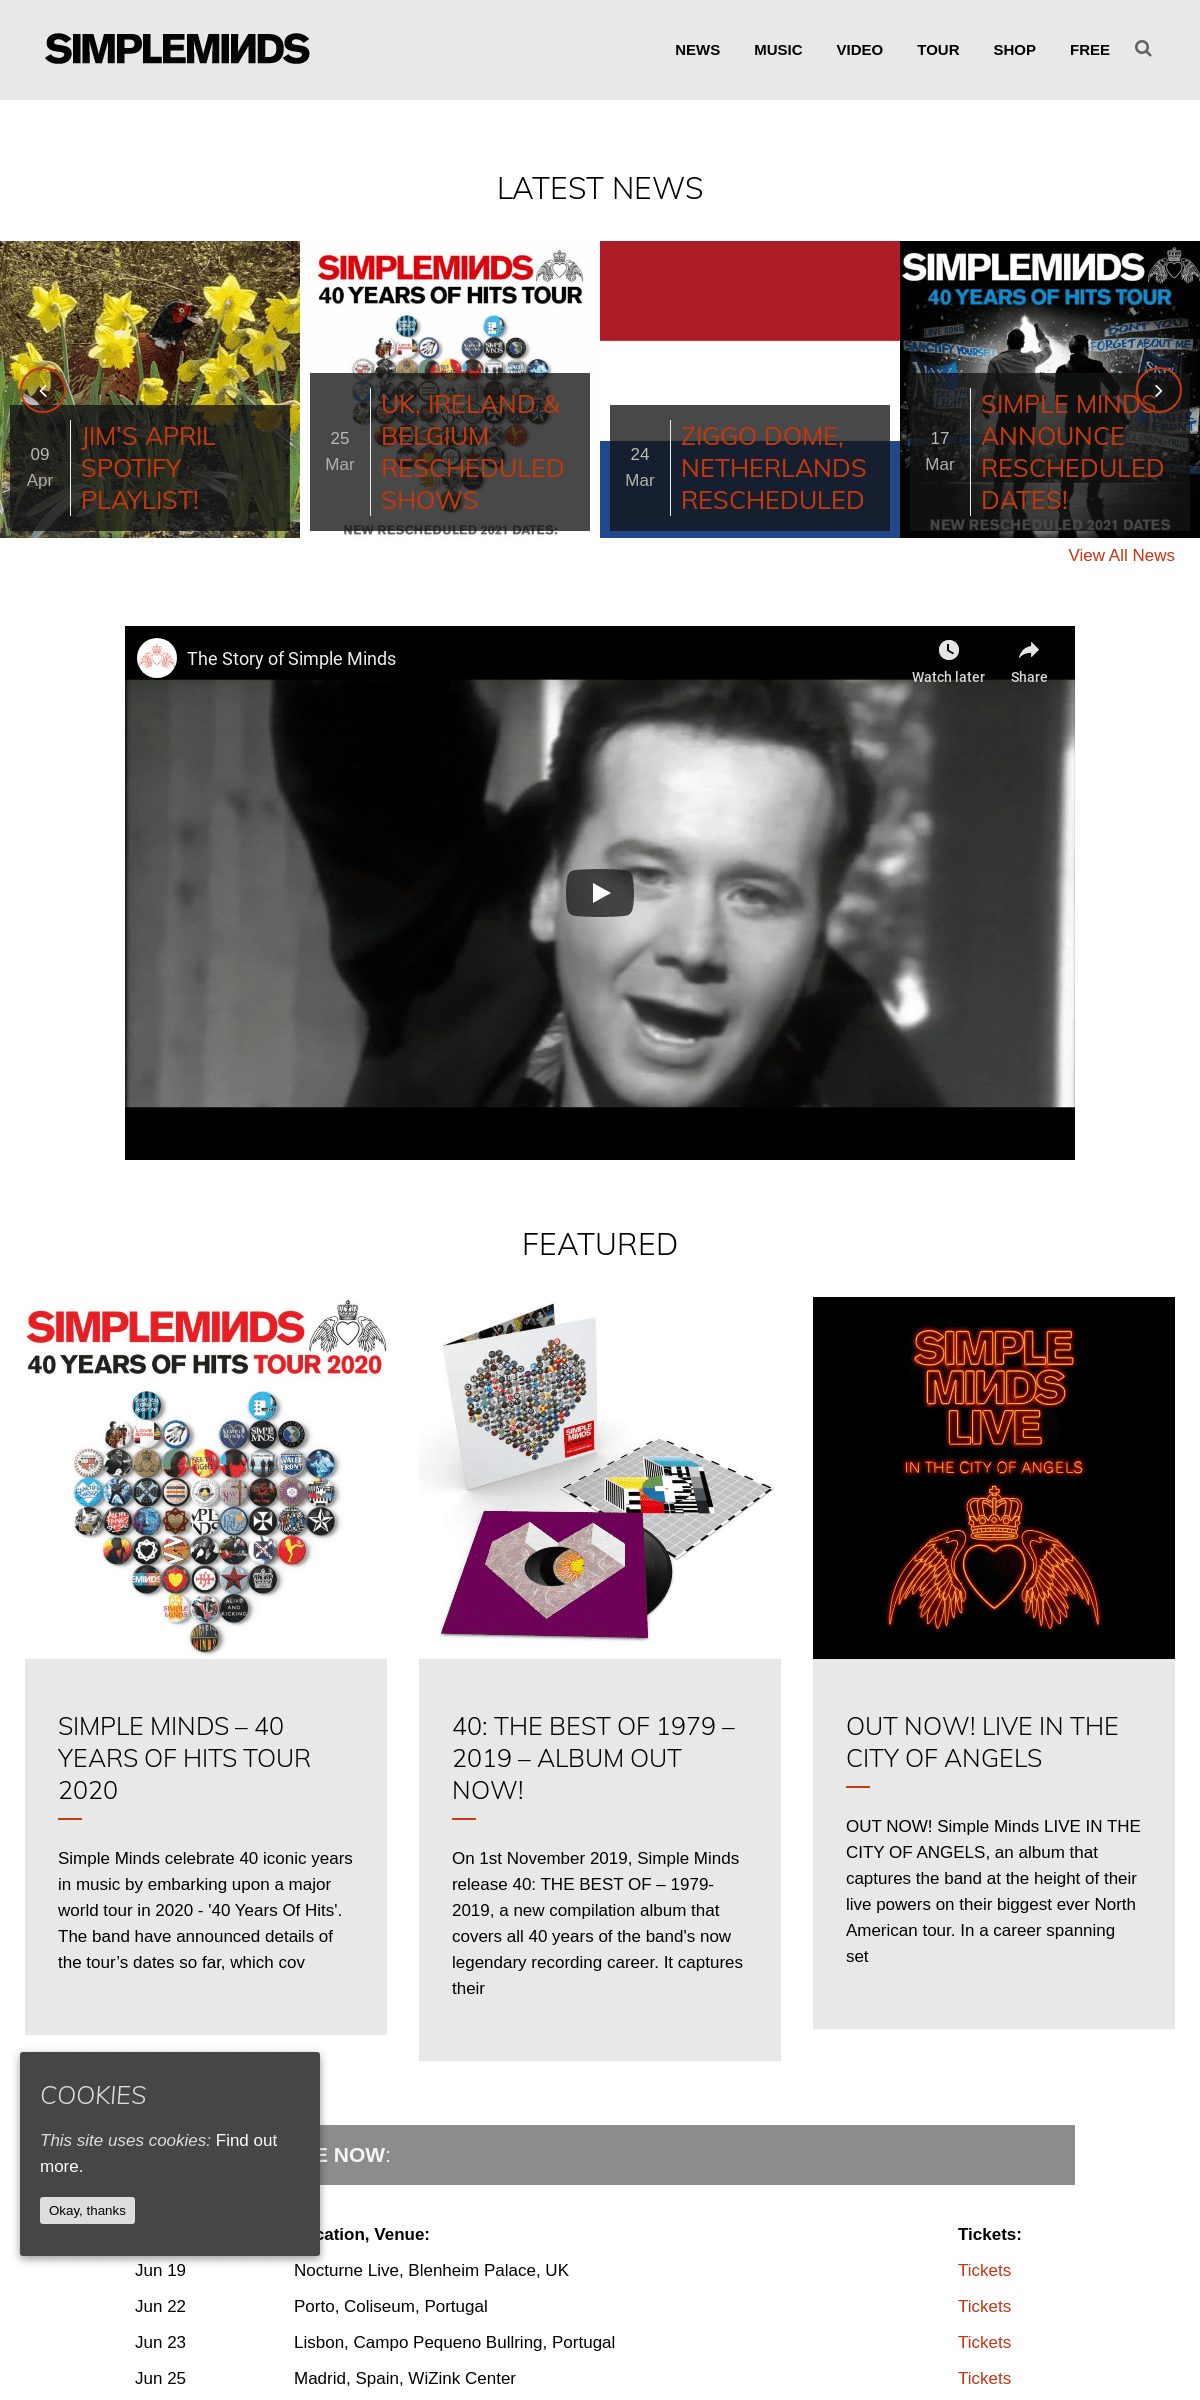 A complete backup of simpleminds.com